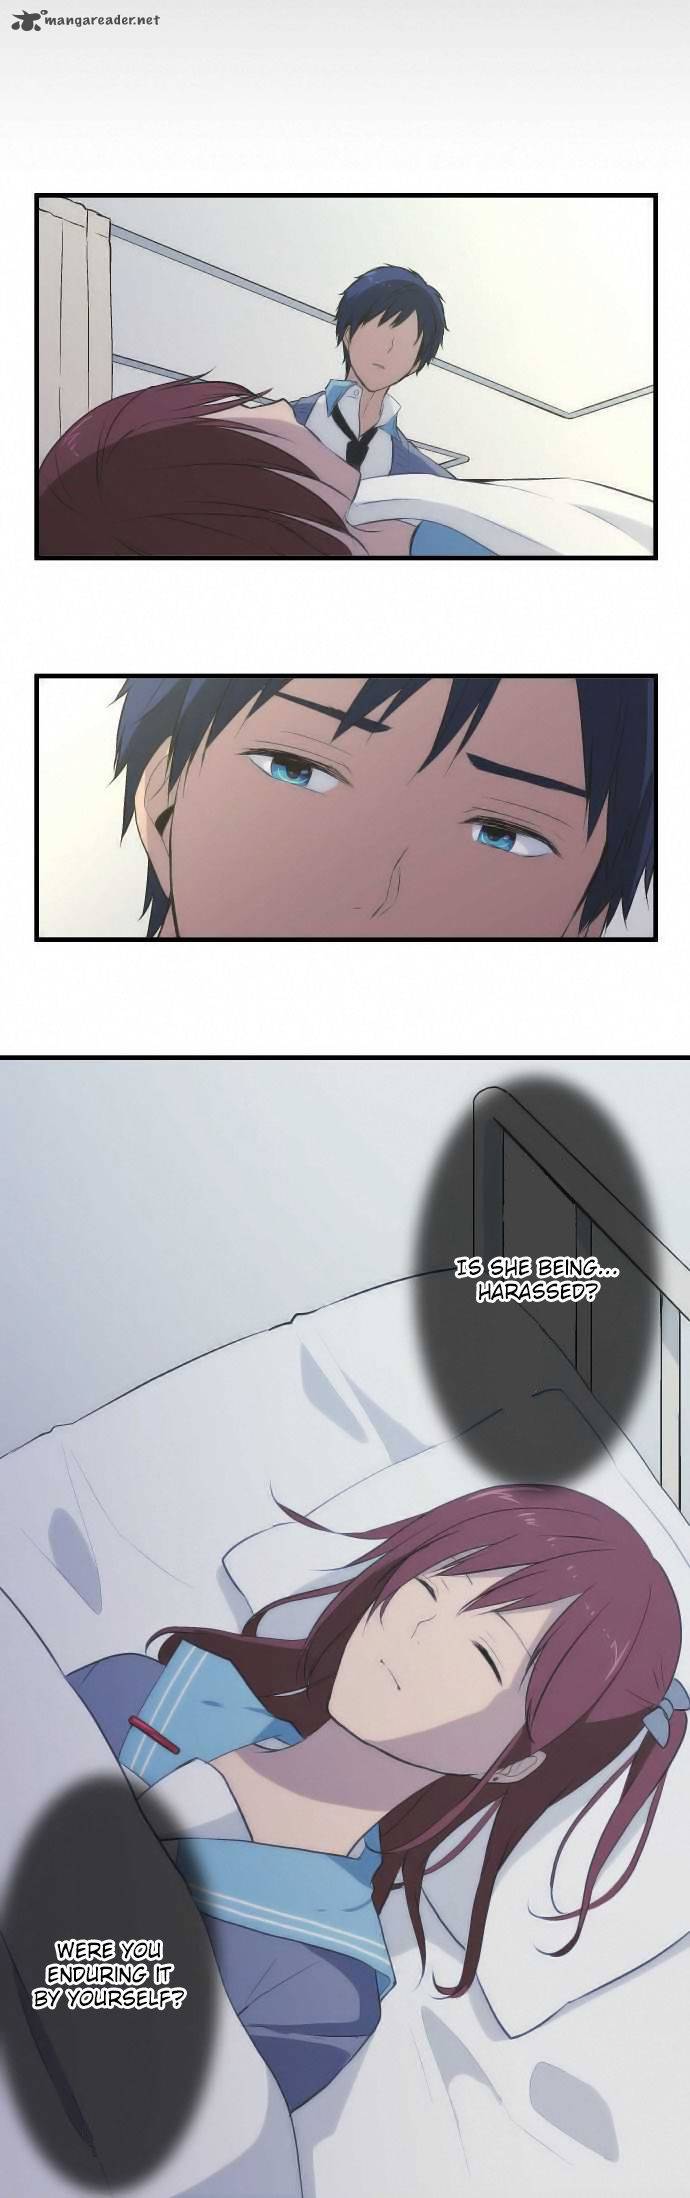 Relife 38 9